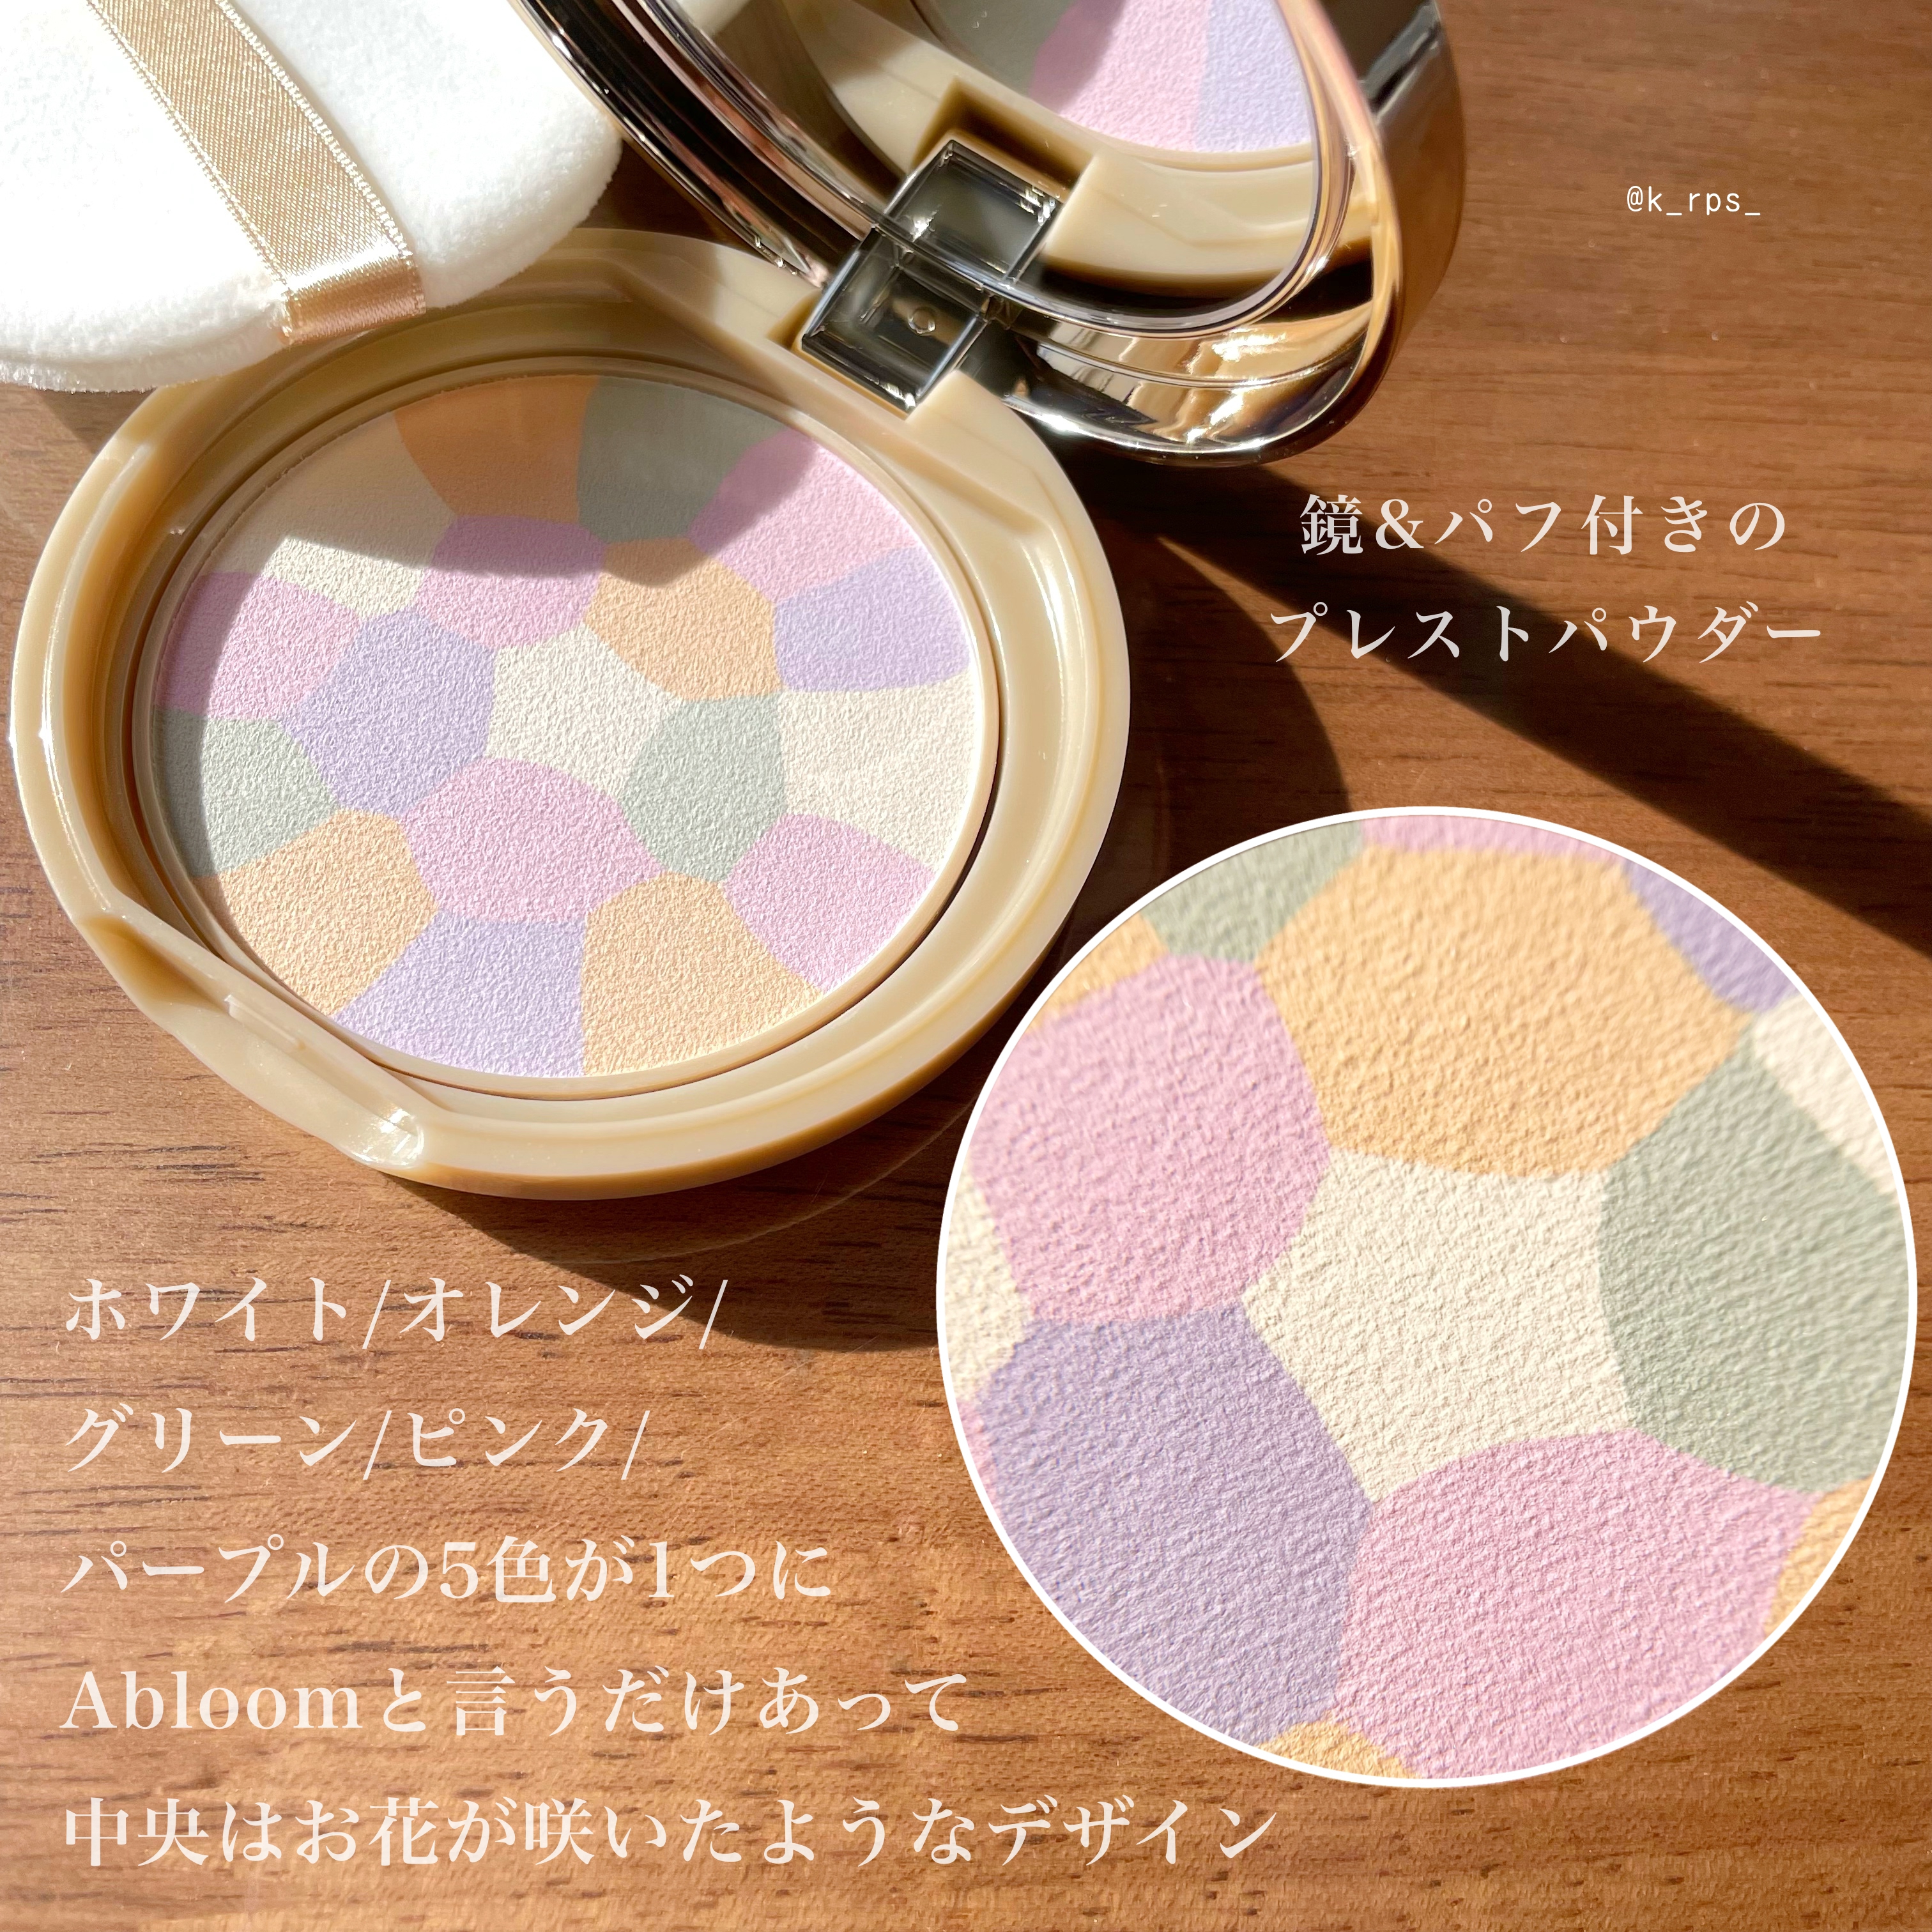 CANMAKE マシュマロフィニッシュパウダー ～Abloom～ 01』by Kei